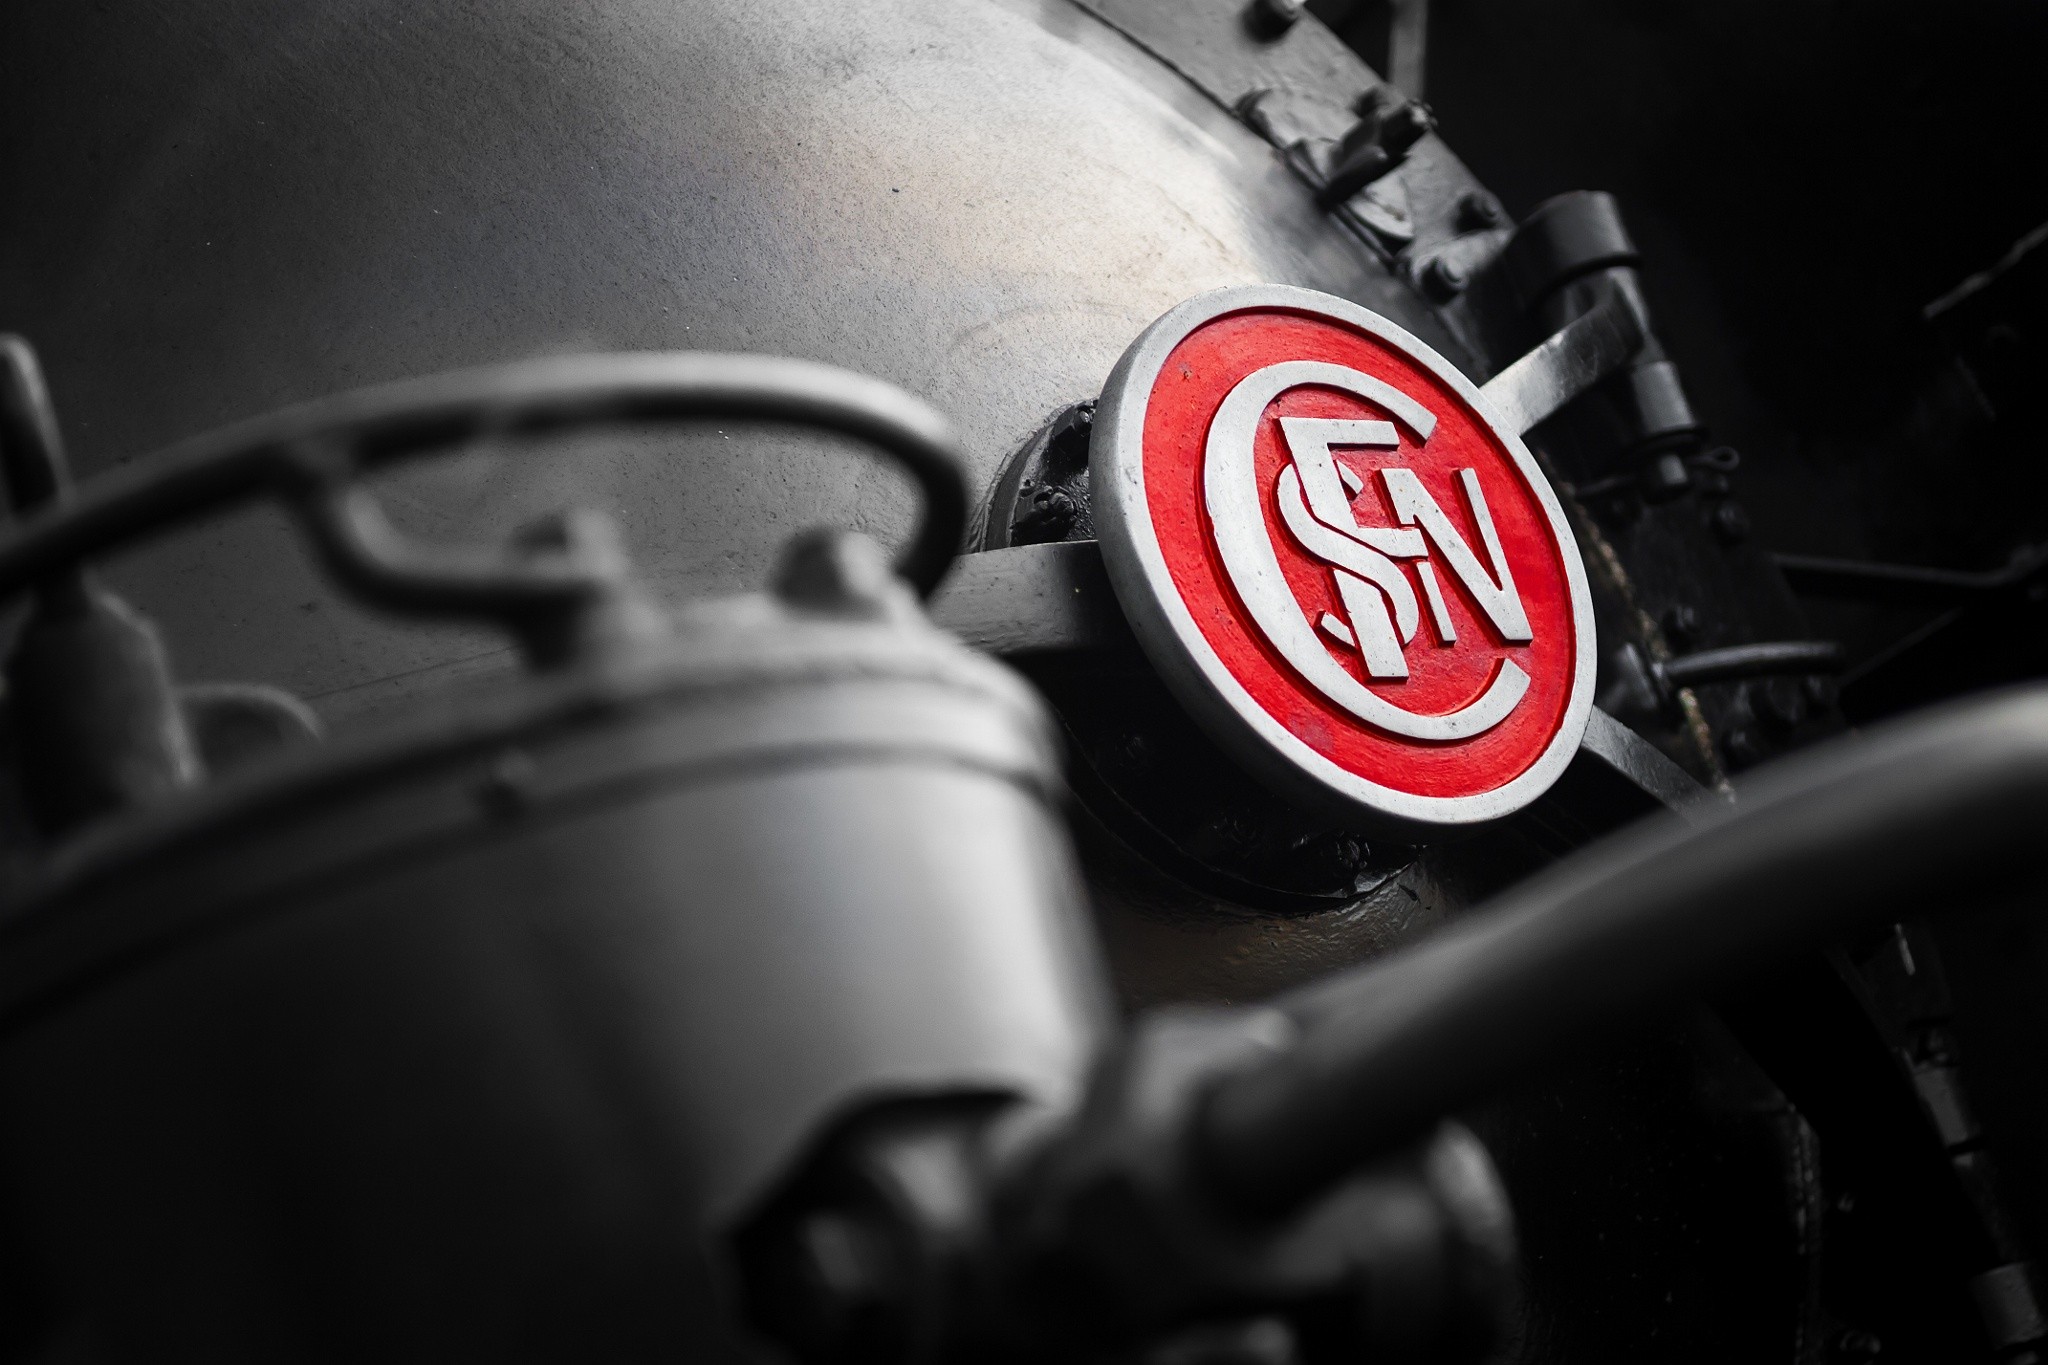 General 2048x1365 photography macro logo pipes parts SNCF railway train locomotive vehicle selective coloring